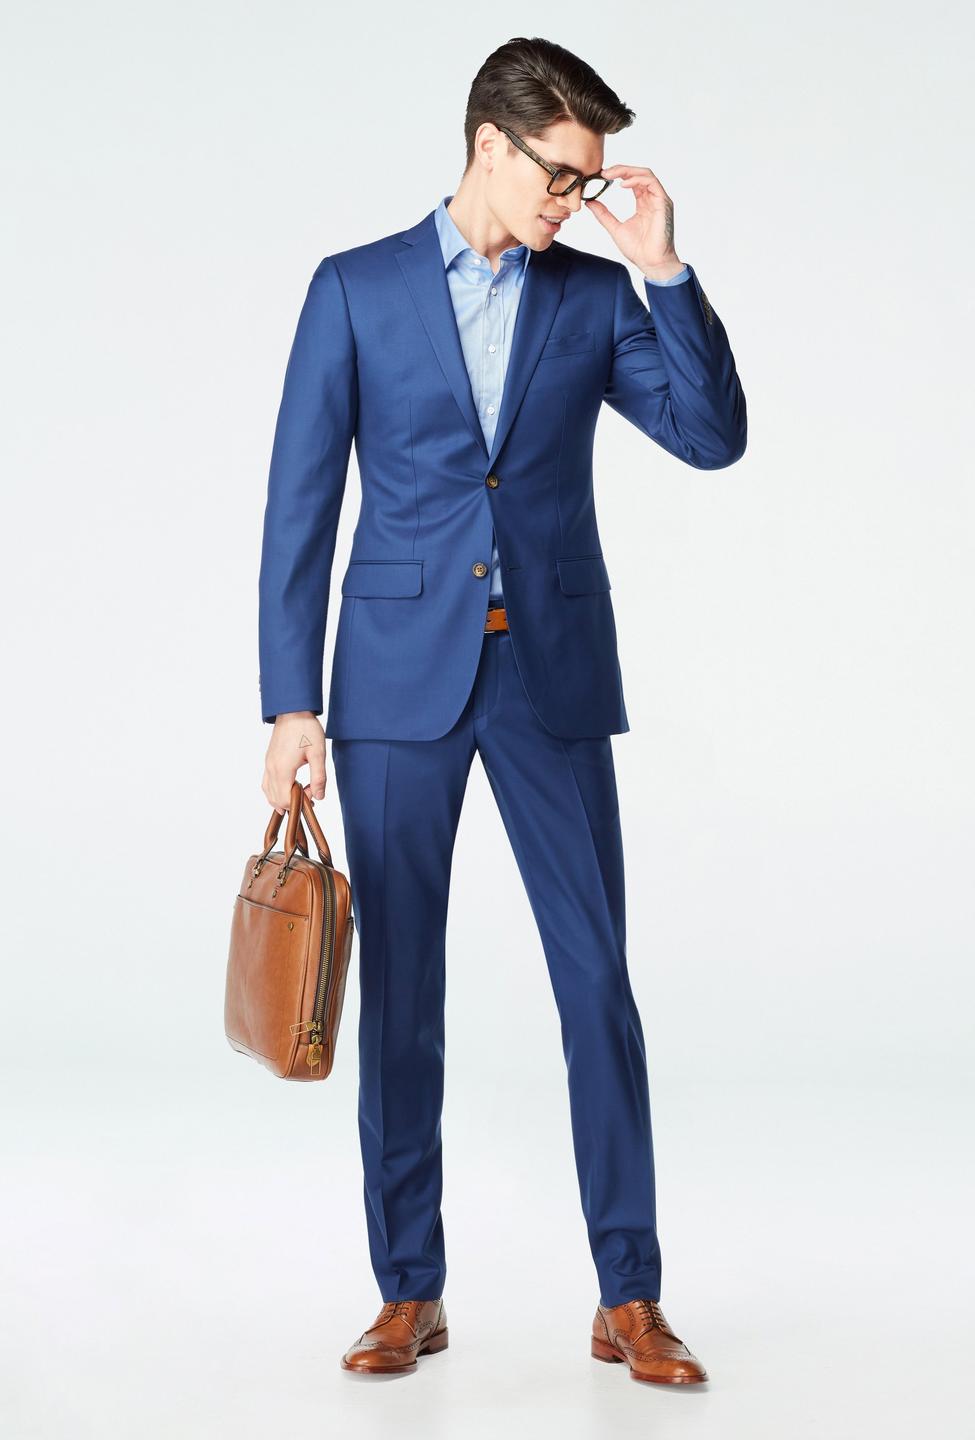 Blue suit - Highbridge Solid Design from Luxury Indochino Collection